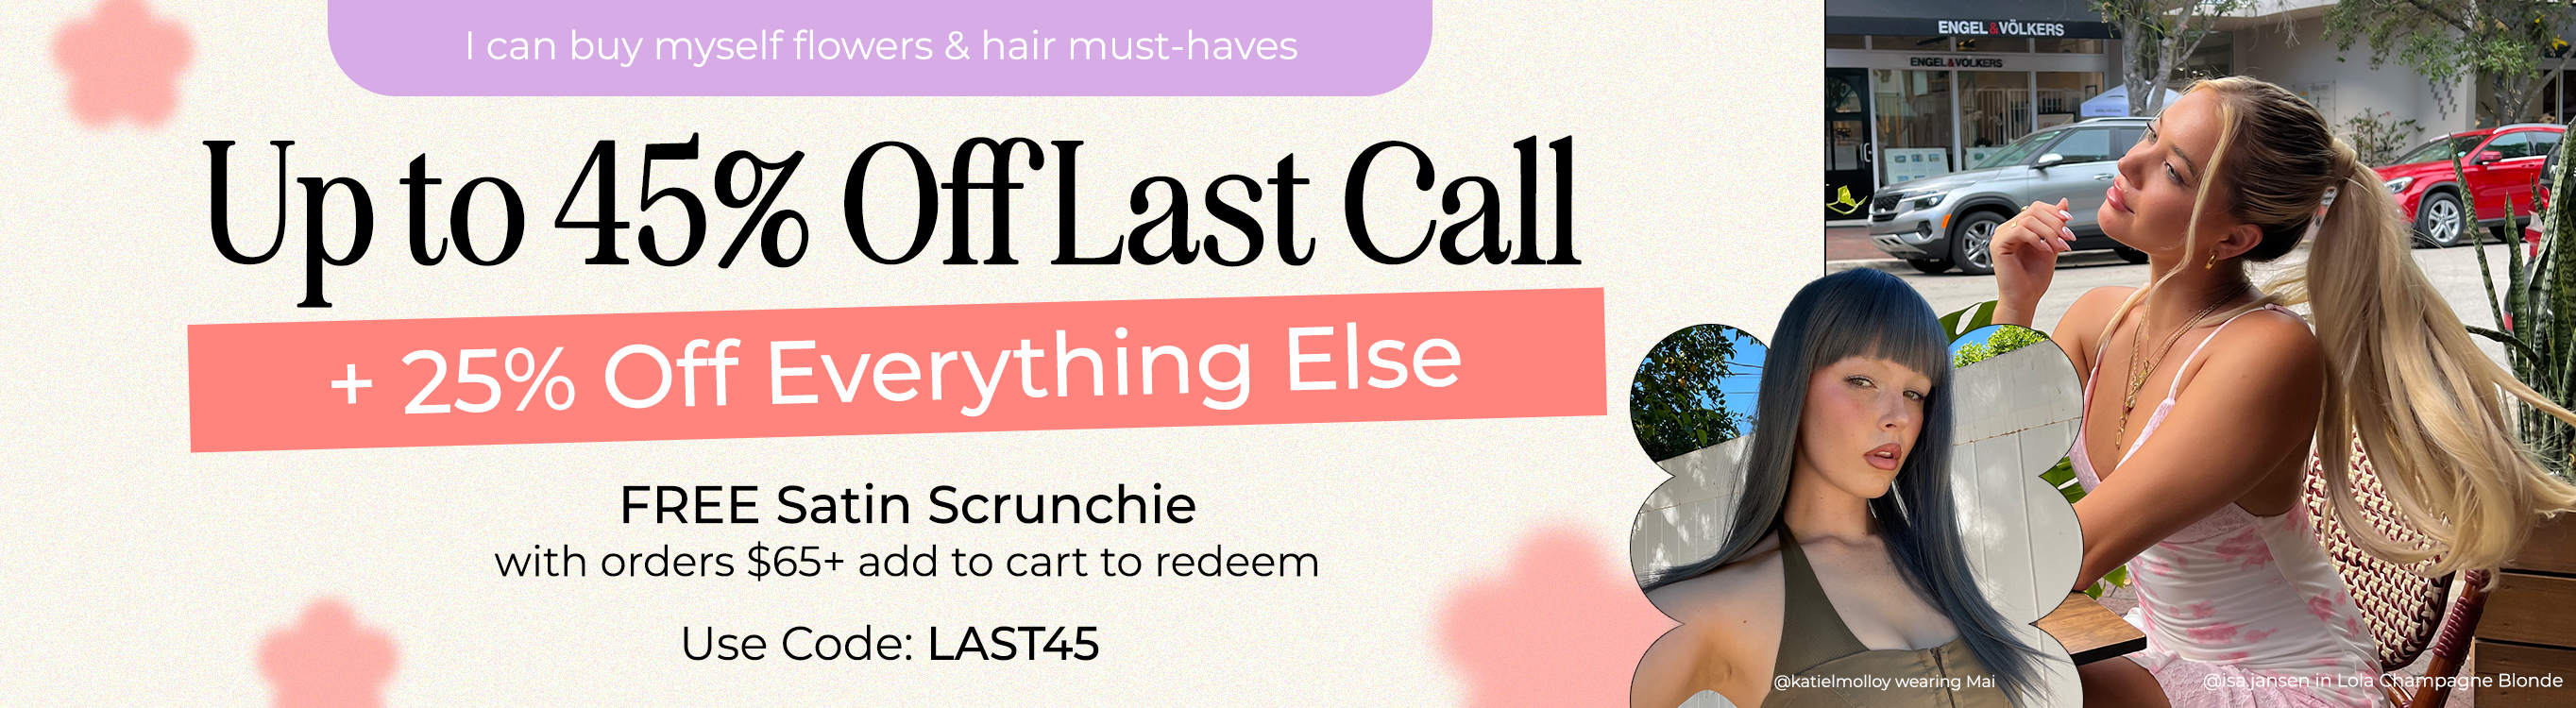 45% OFF LAST CALL + 25% OFF ELSE